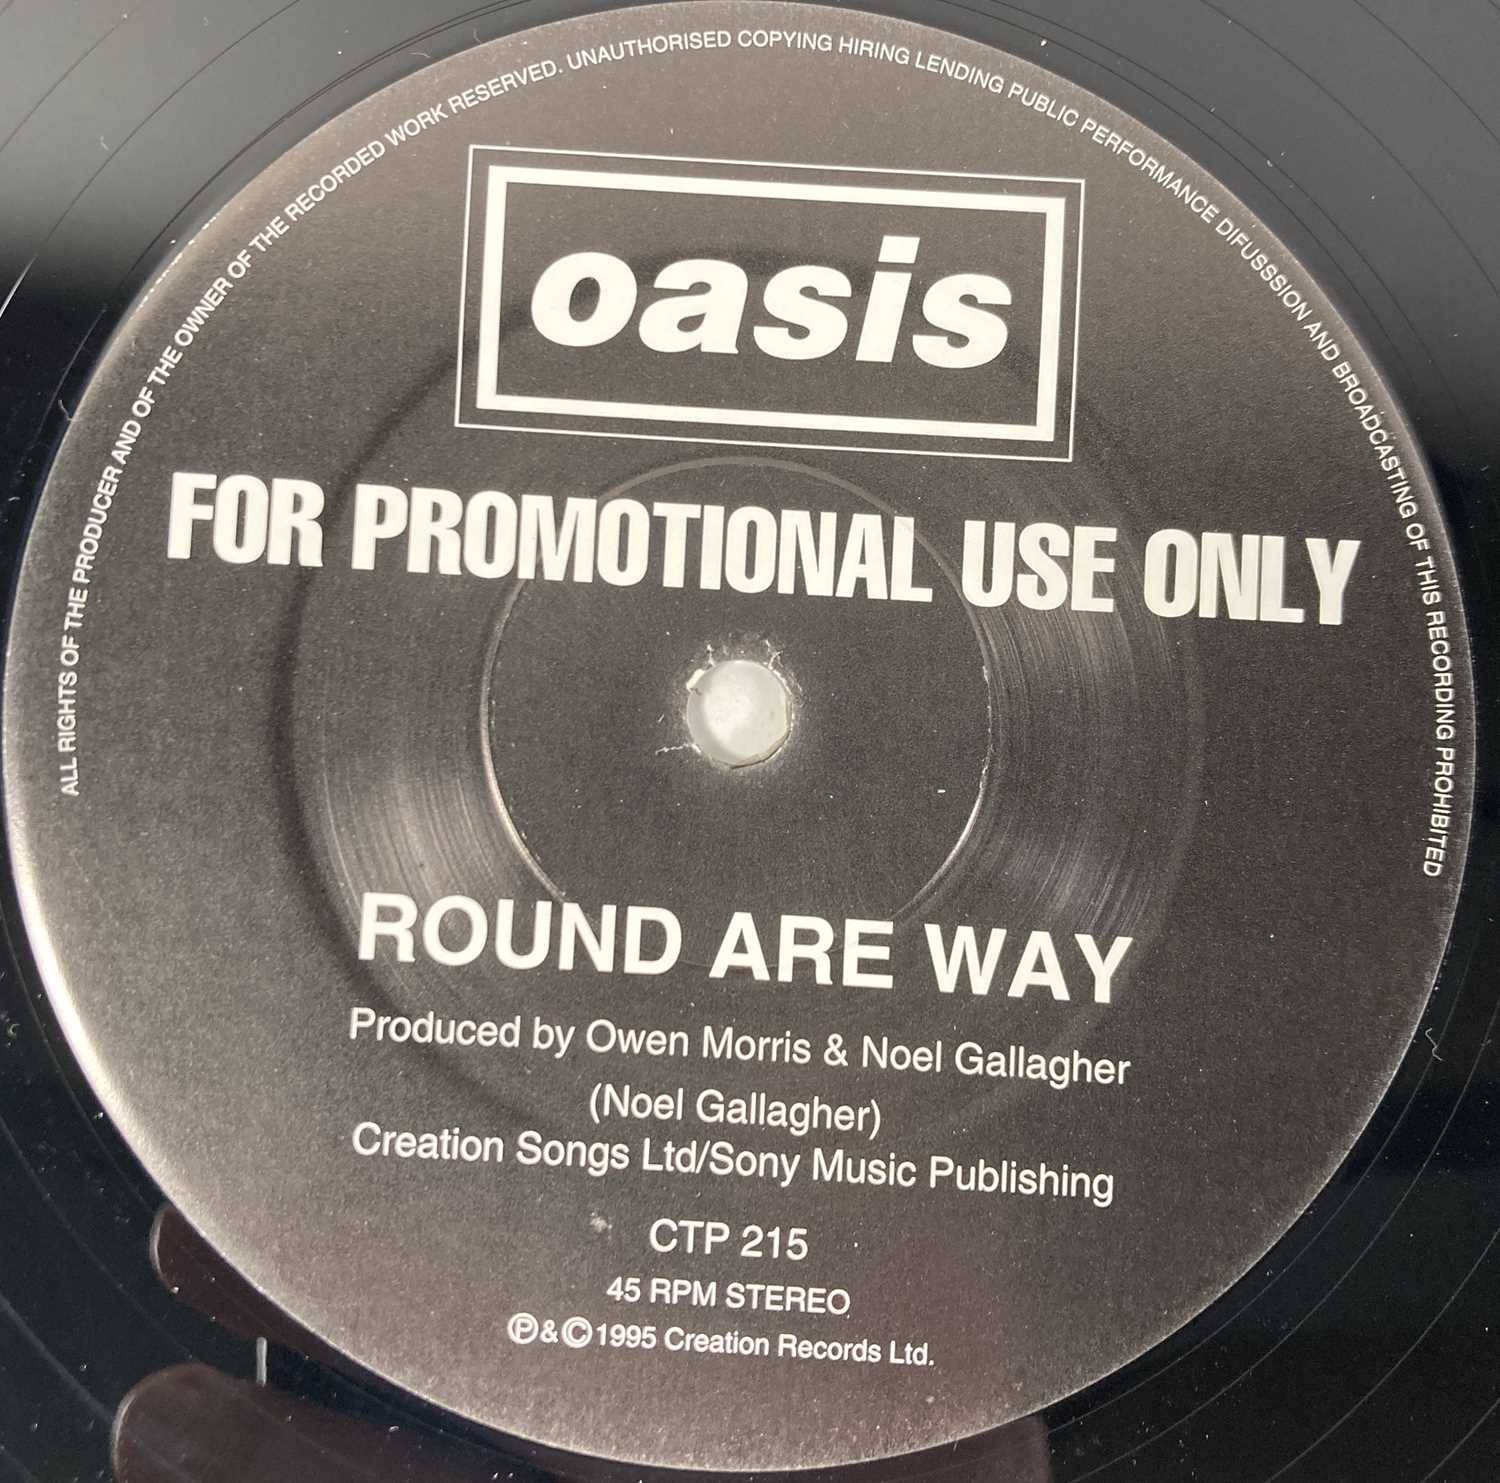 OASIS - IT'S GOOD TO BE FREE/ ROUND OUR WAY 12" PROMOS PACK - Image 3 of 4